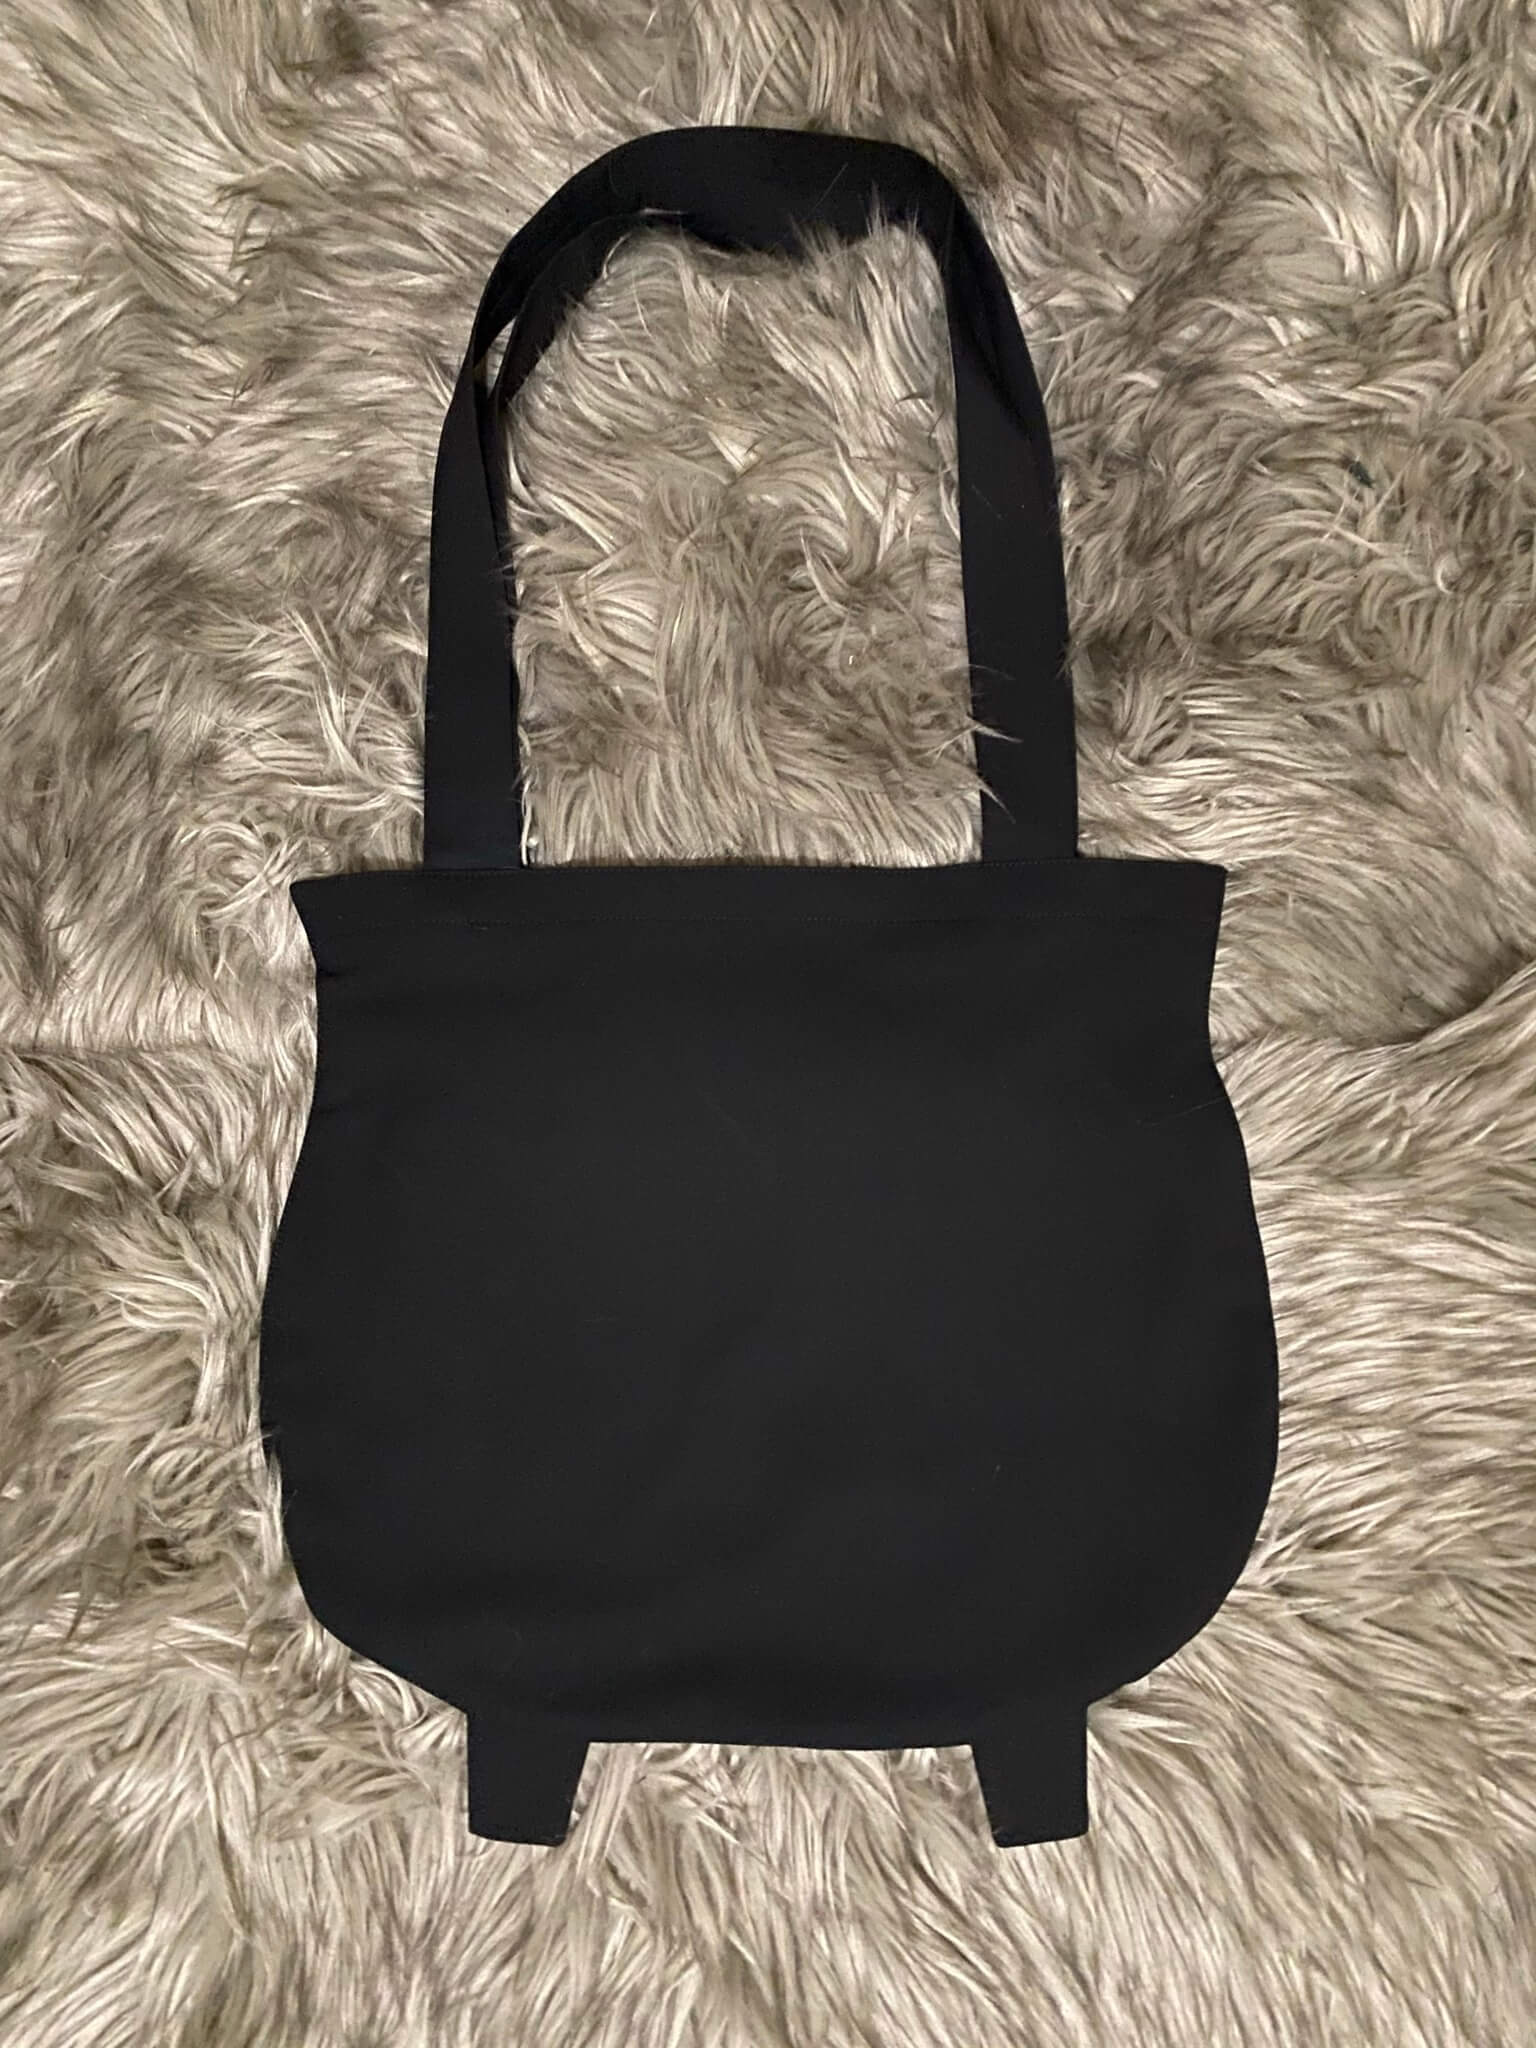 A black tote bag in the shape of a witches cauldron. With two little cauldron feet on the bottom and two shoulder straps.